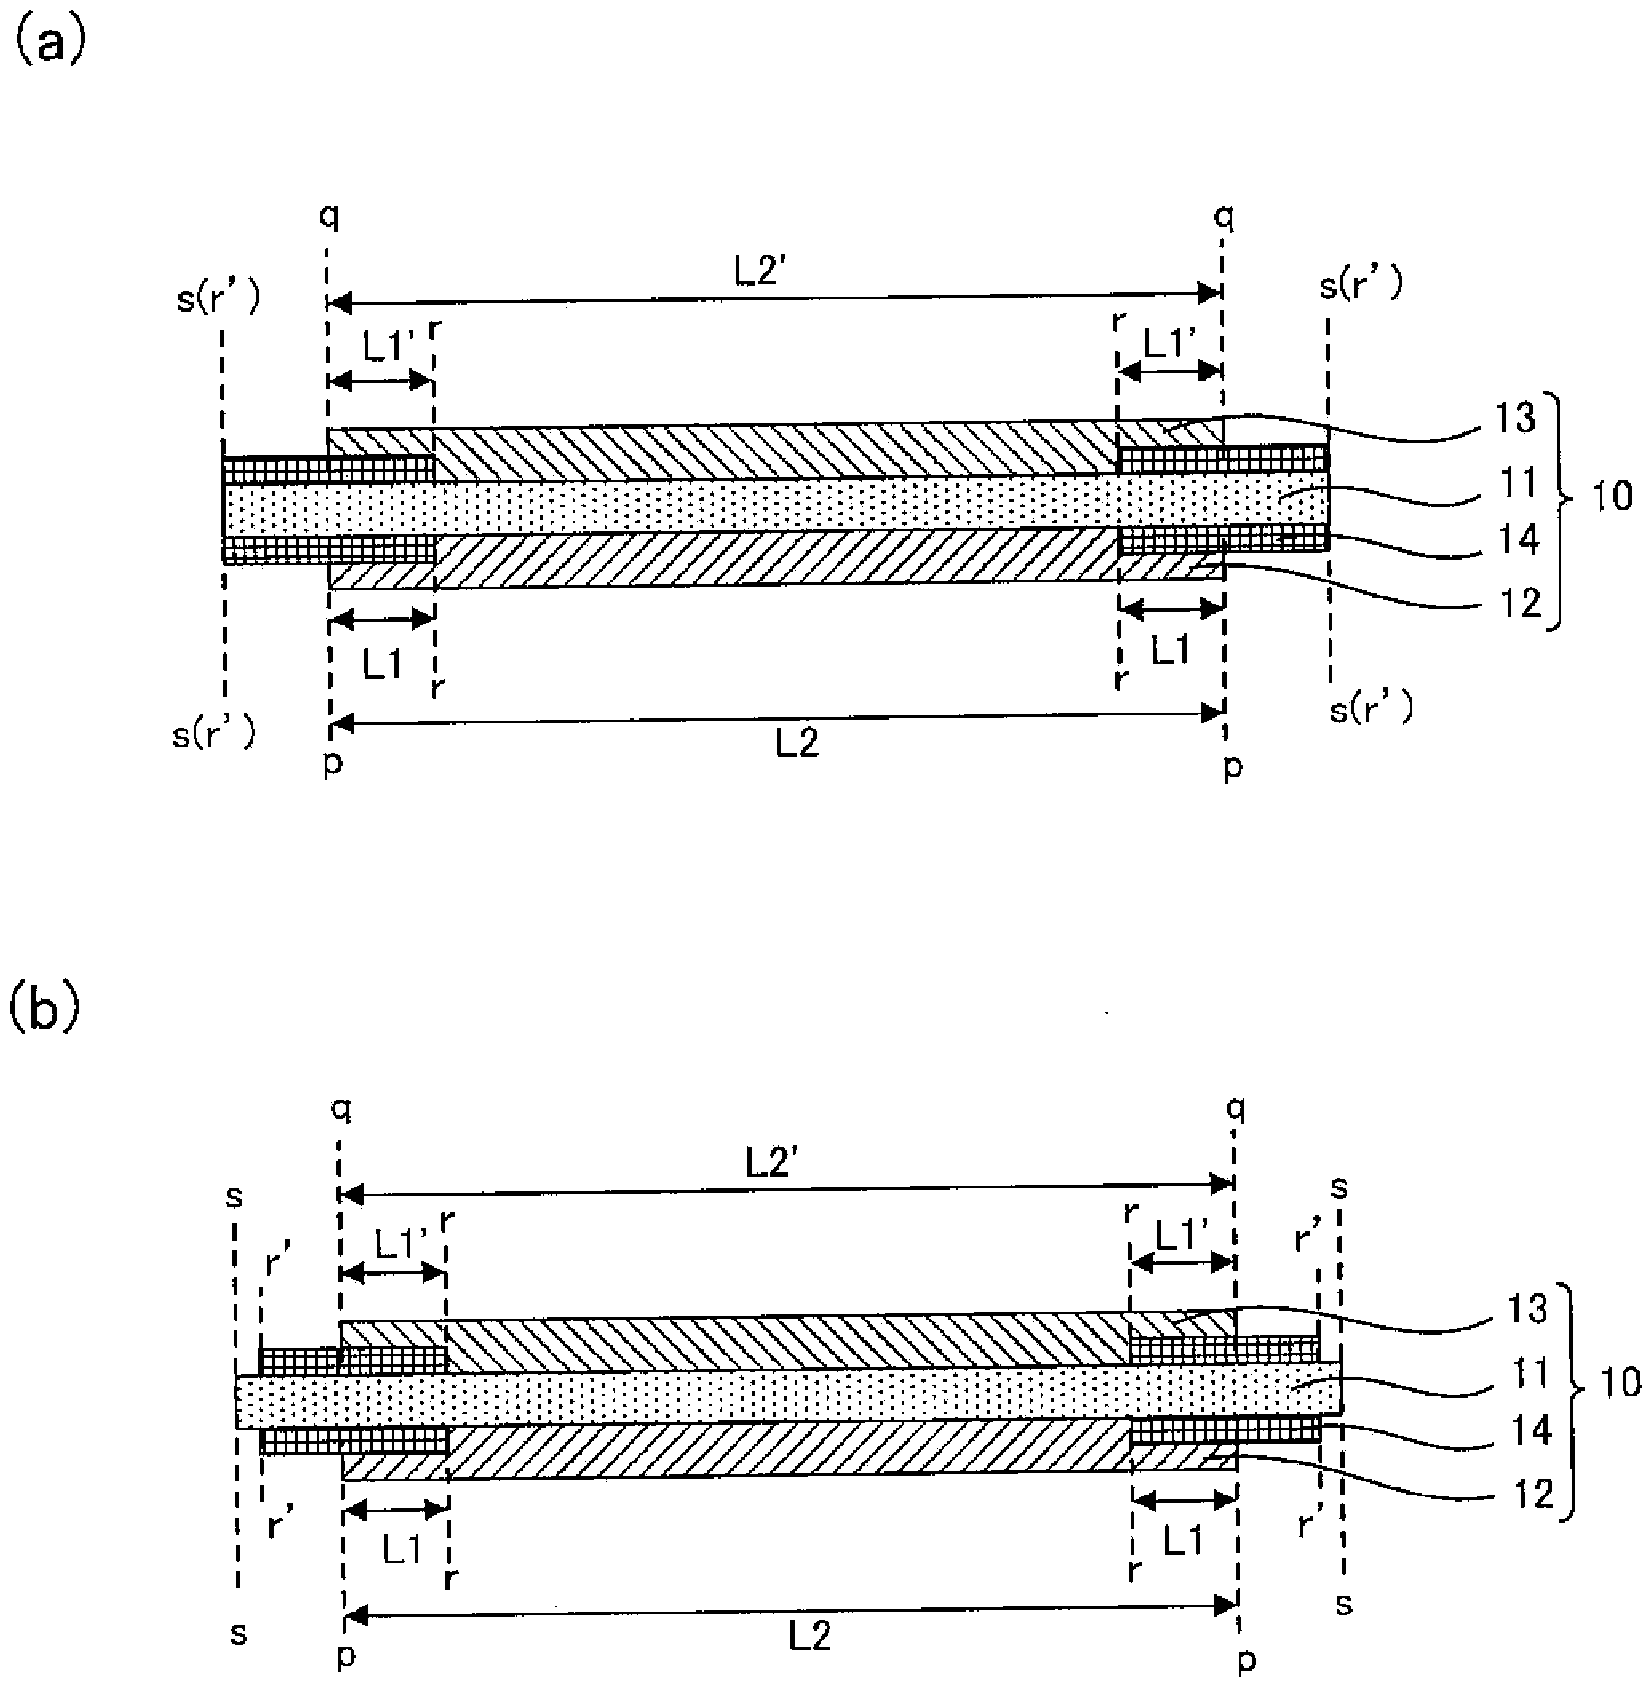 Bipolar all-solid-state battery